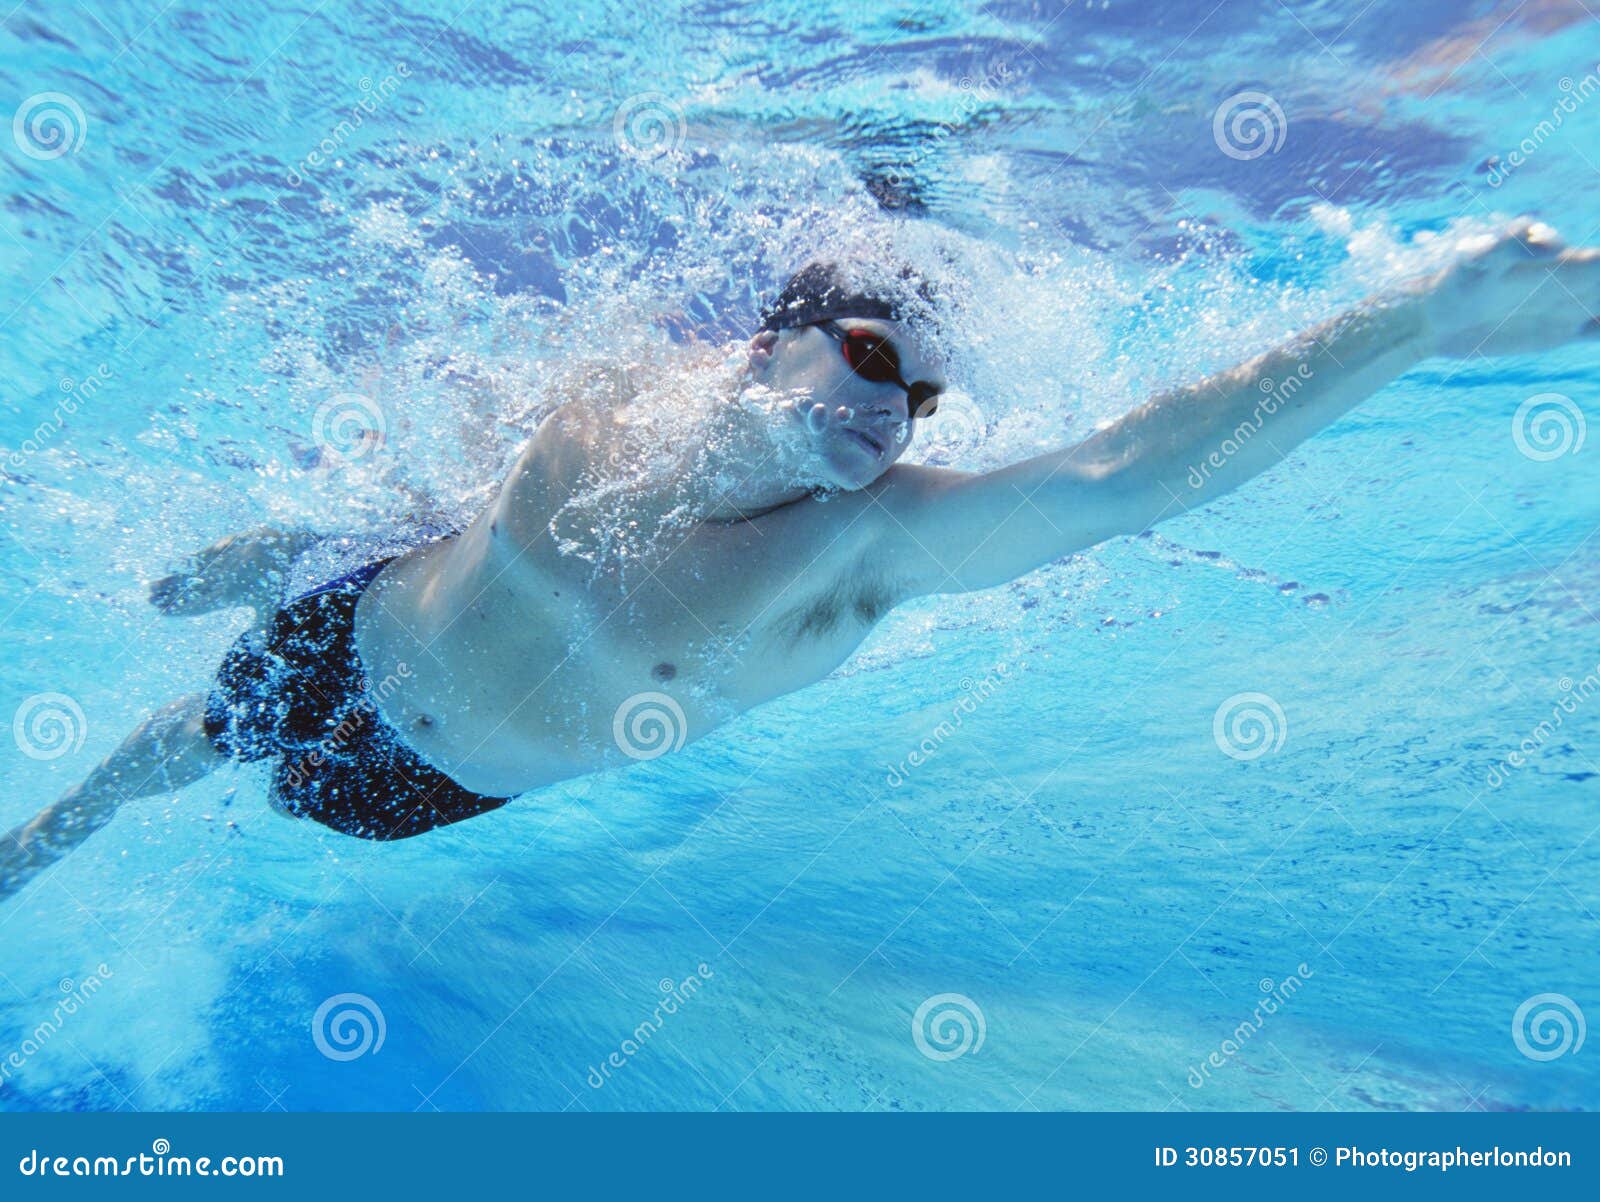 underwater shot of professional male athlete swimming in pool